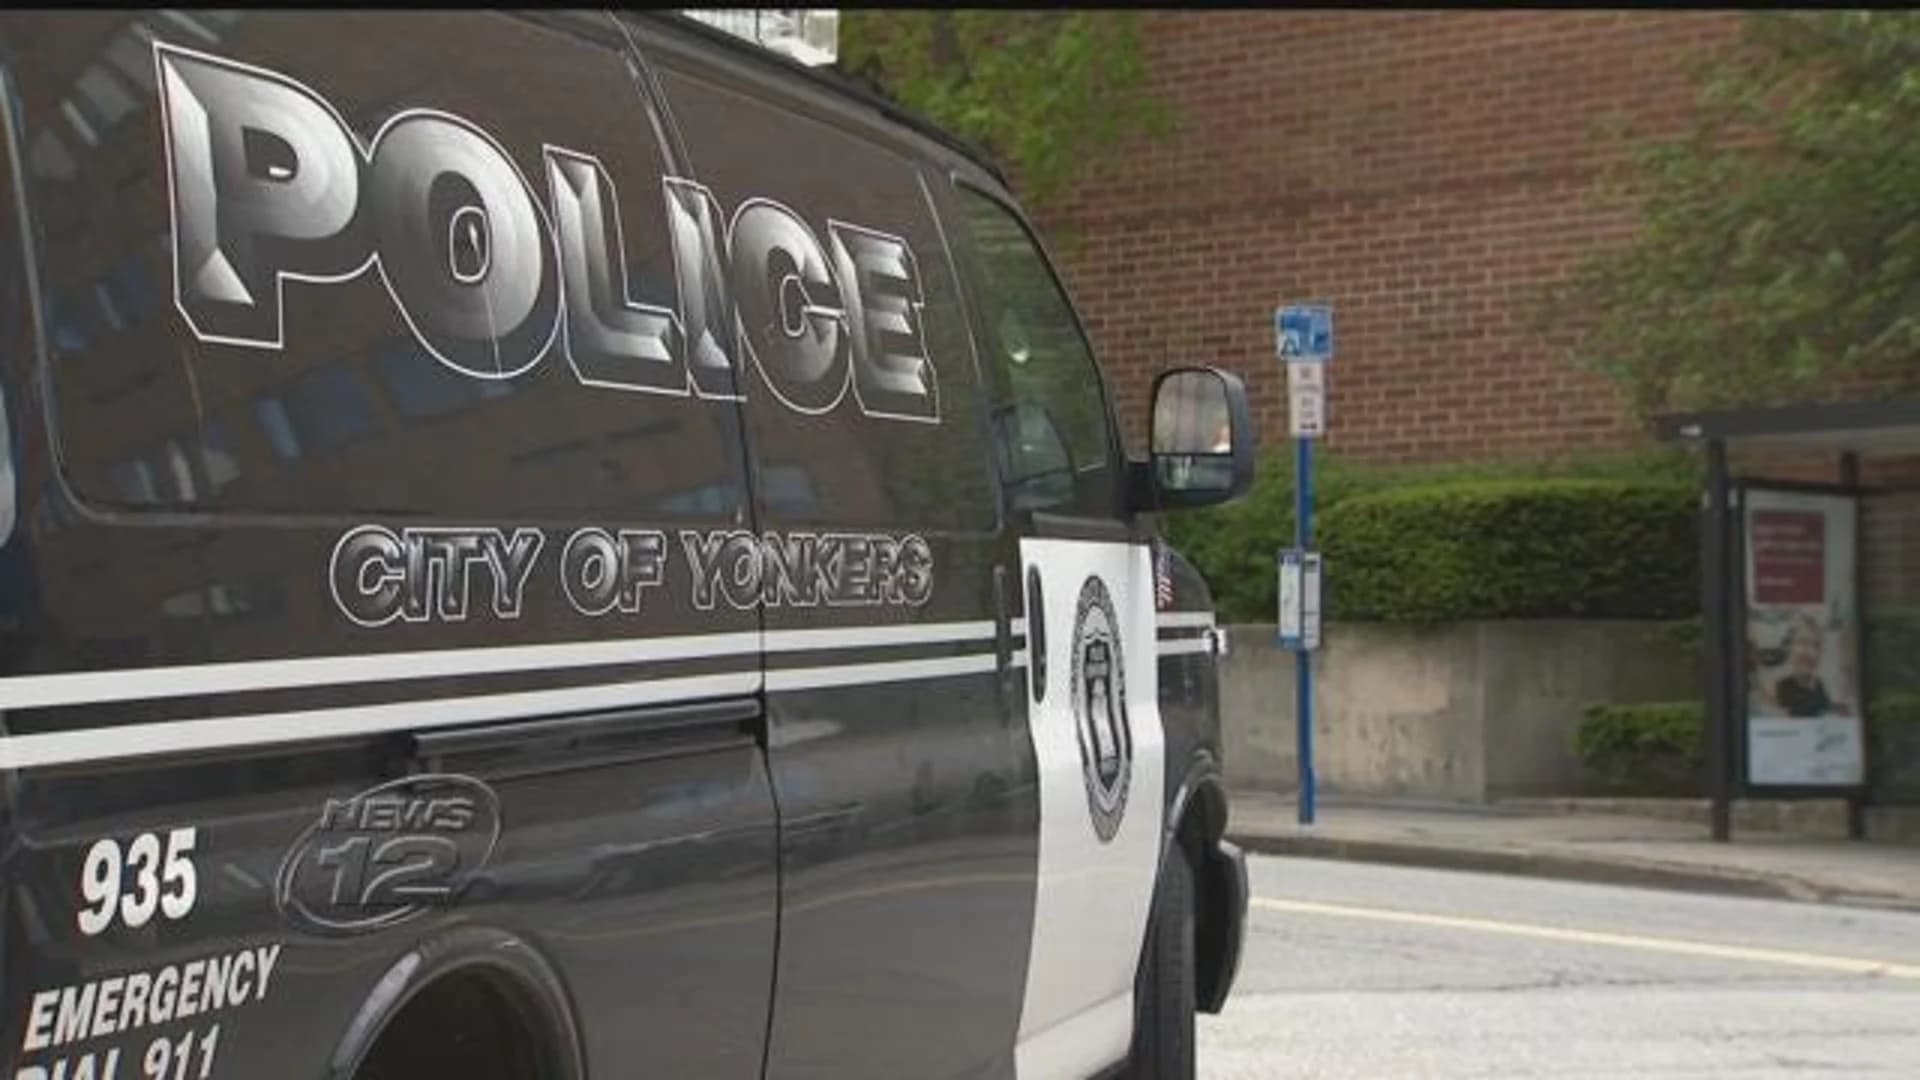 Yonkers police tout decrease in crime rate